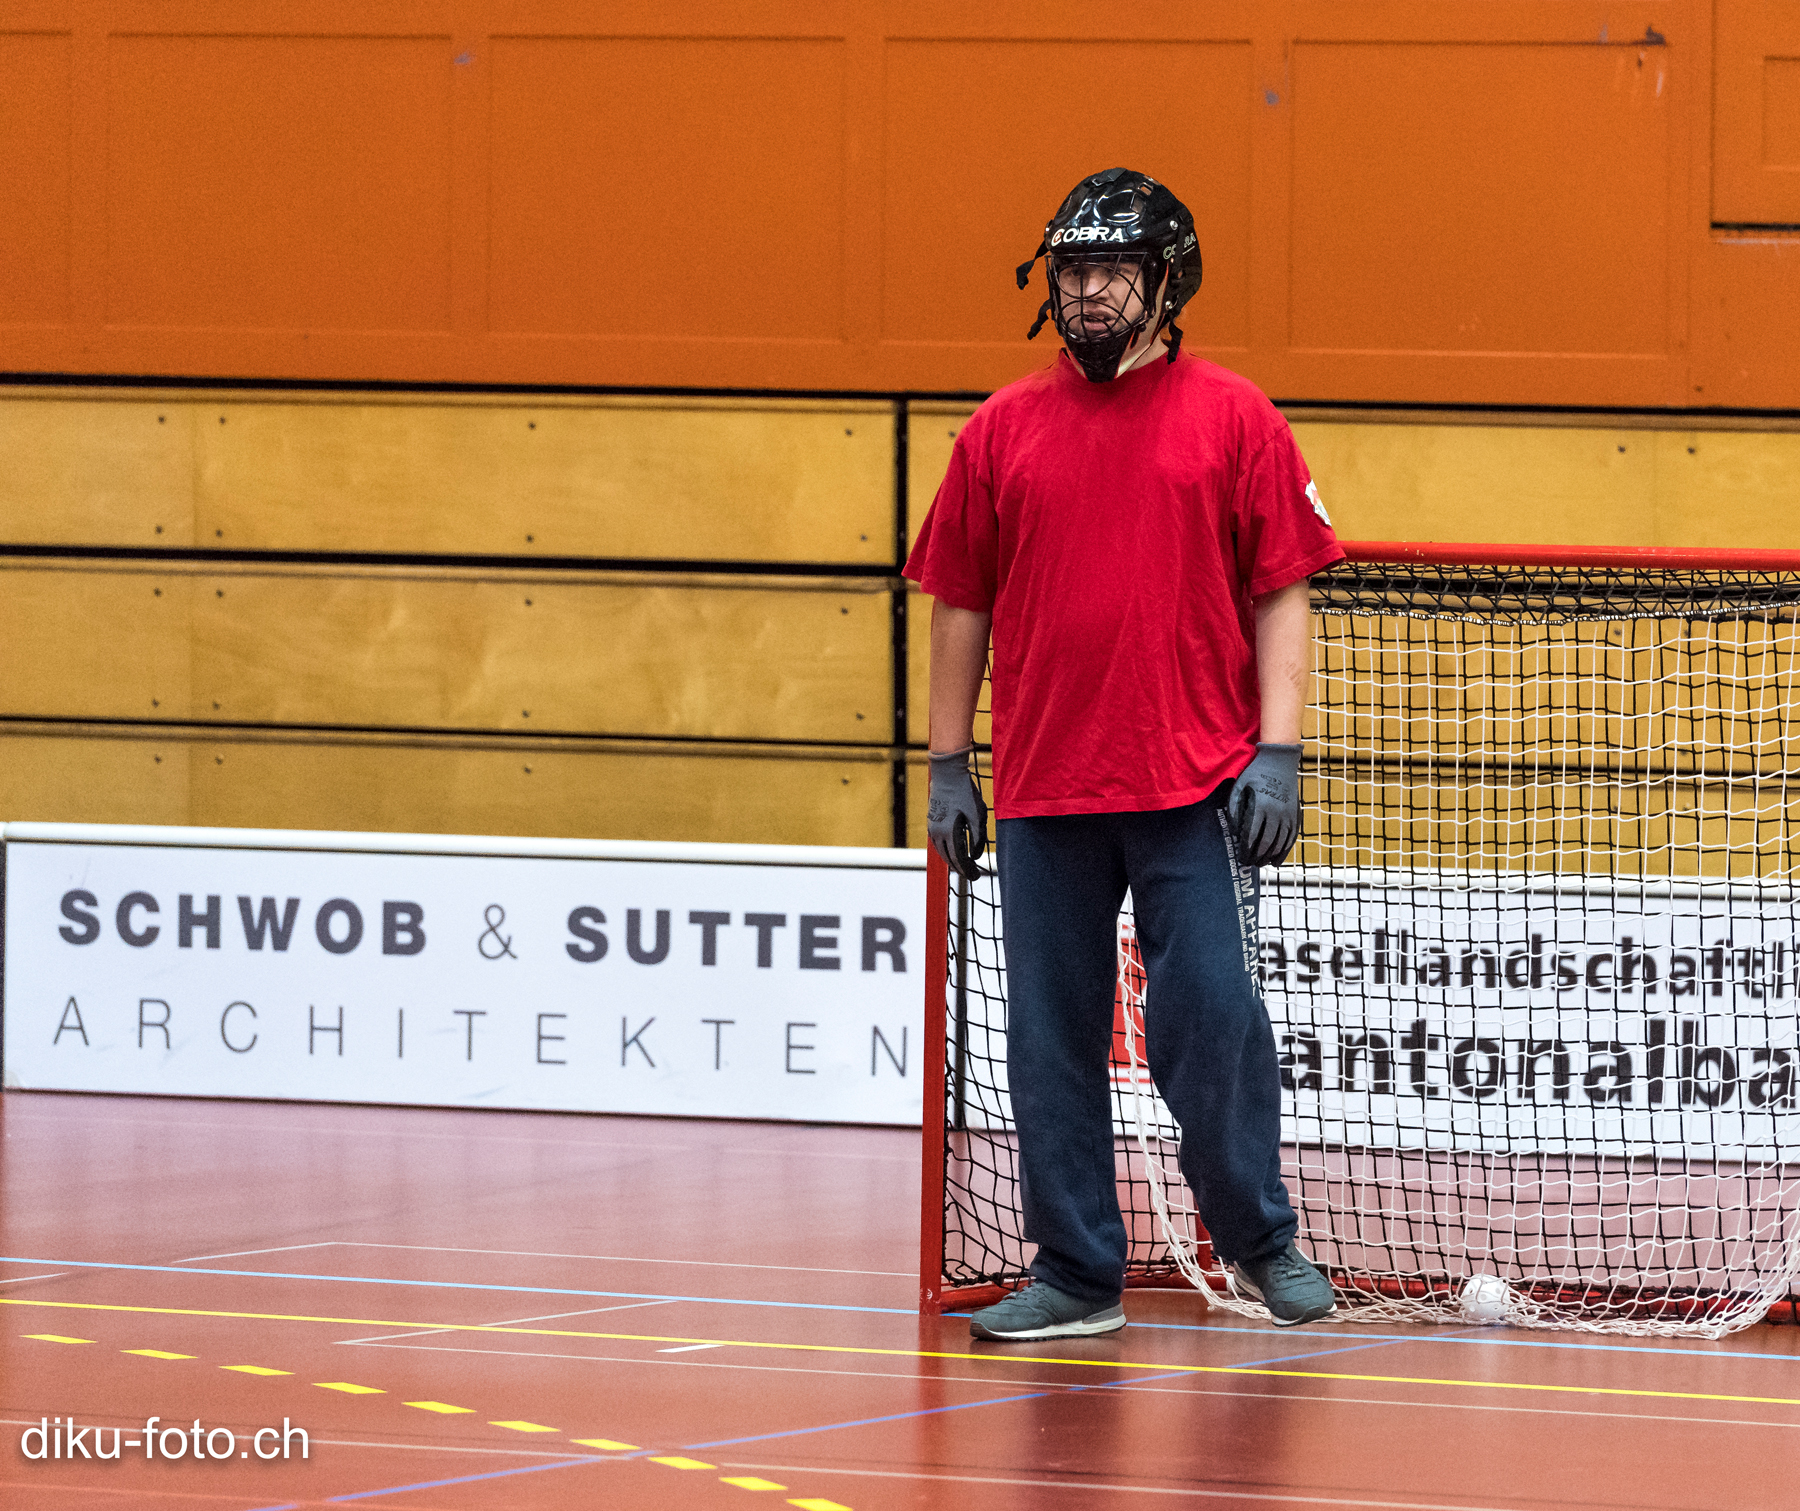 112Floorball Cup 2017 in Sissach